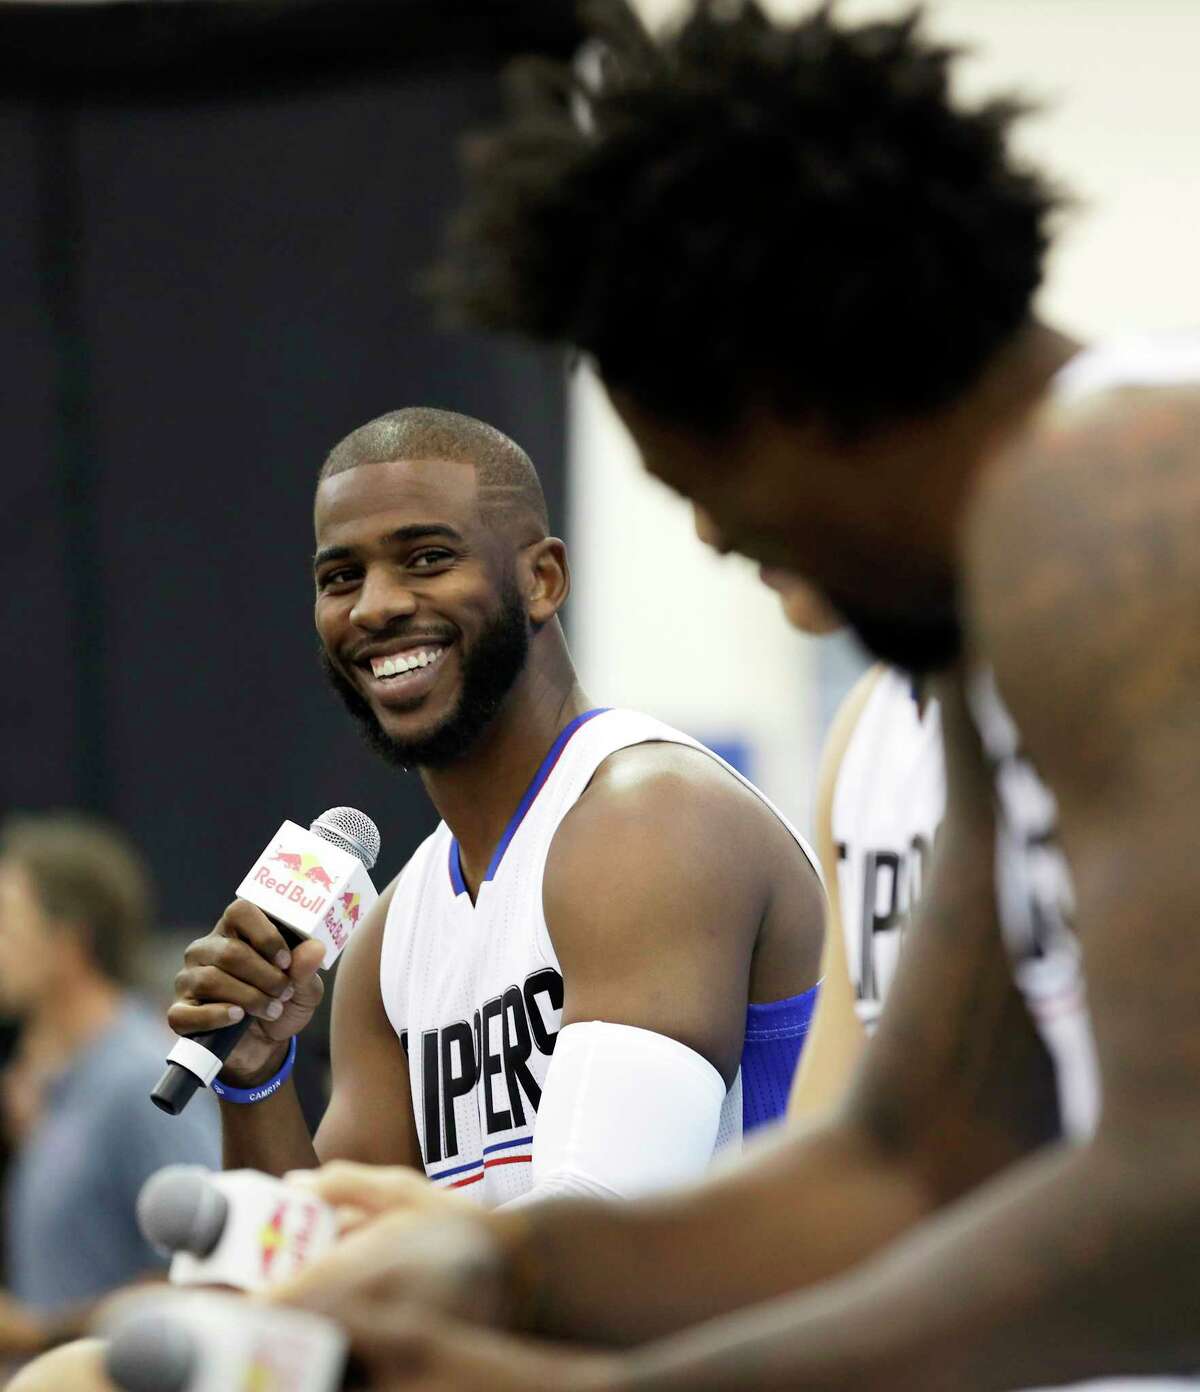 FILE - In this Sept. 26, 2016, file photo, Los Angeles Clippers' Chris Paul laughs as he, Blake Griffin and DeAndre Jordan, right, talk during the team's NBA basketball media day, in Playa Vista, Calif. The Houston Rockets have reached an agreement to trade for Los Angeles Clippers point guard Chris Paul according to a person familiar with the deal. The league source spoke to The Associated Press on Wednesday, June 28, 2017, on the condition of anonymity because the team hasn't finalized the trade.(AP Photo/Ryan Kang, File)